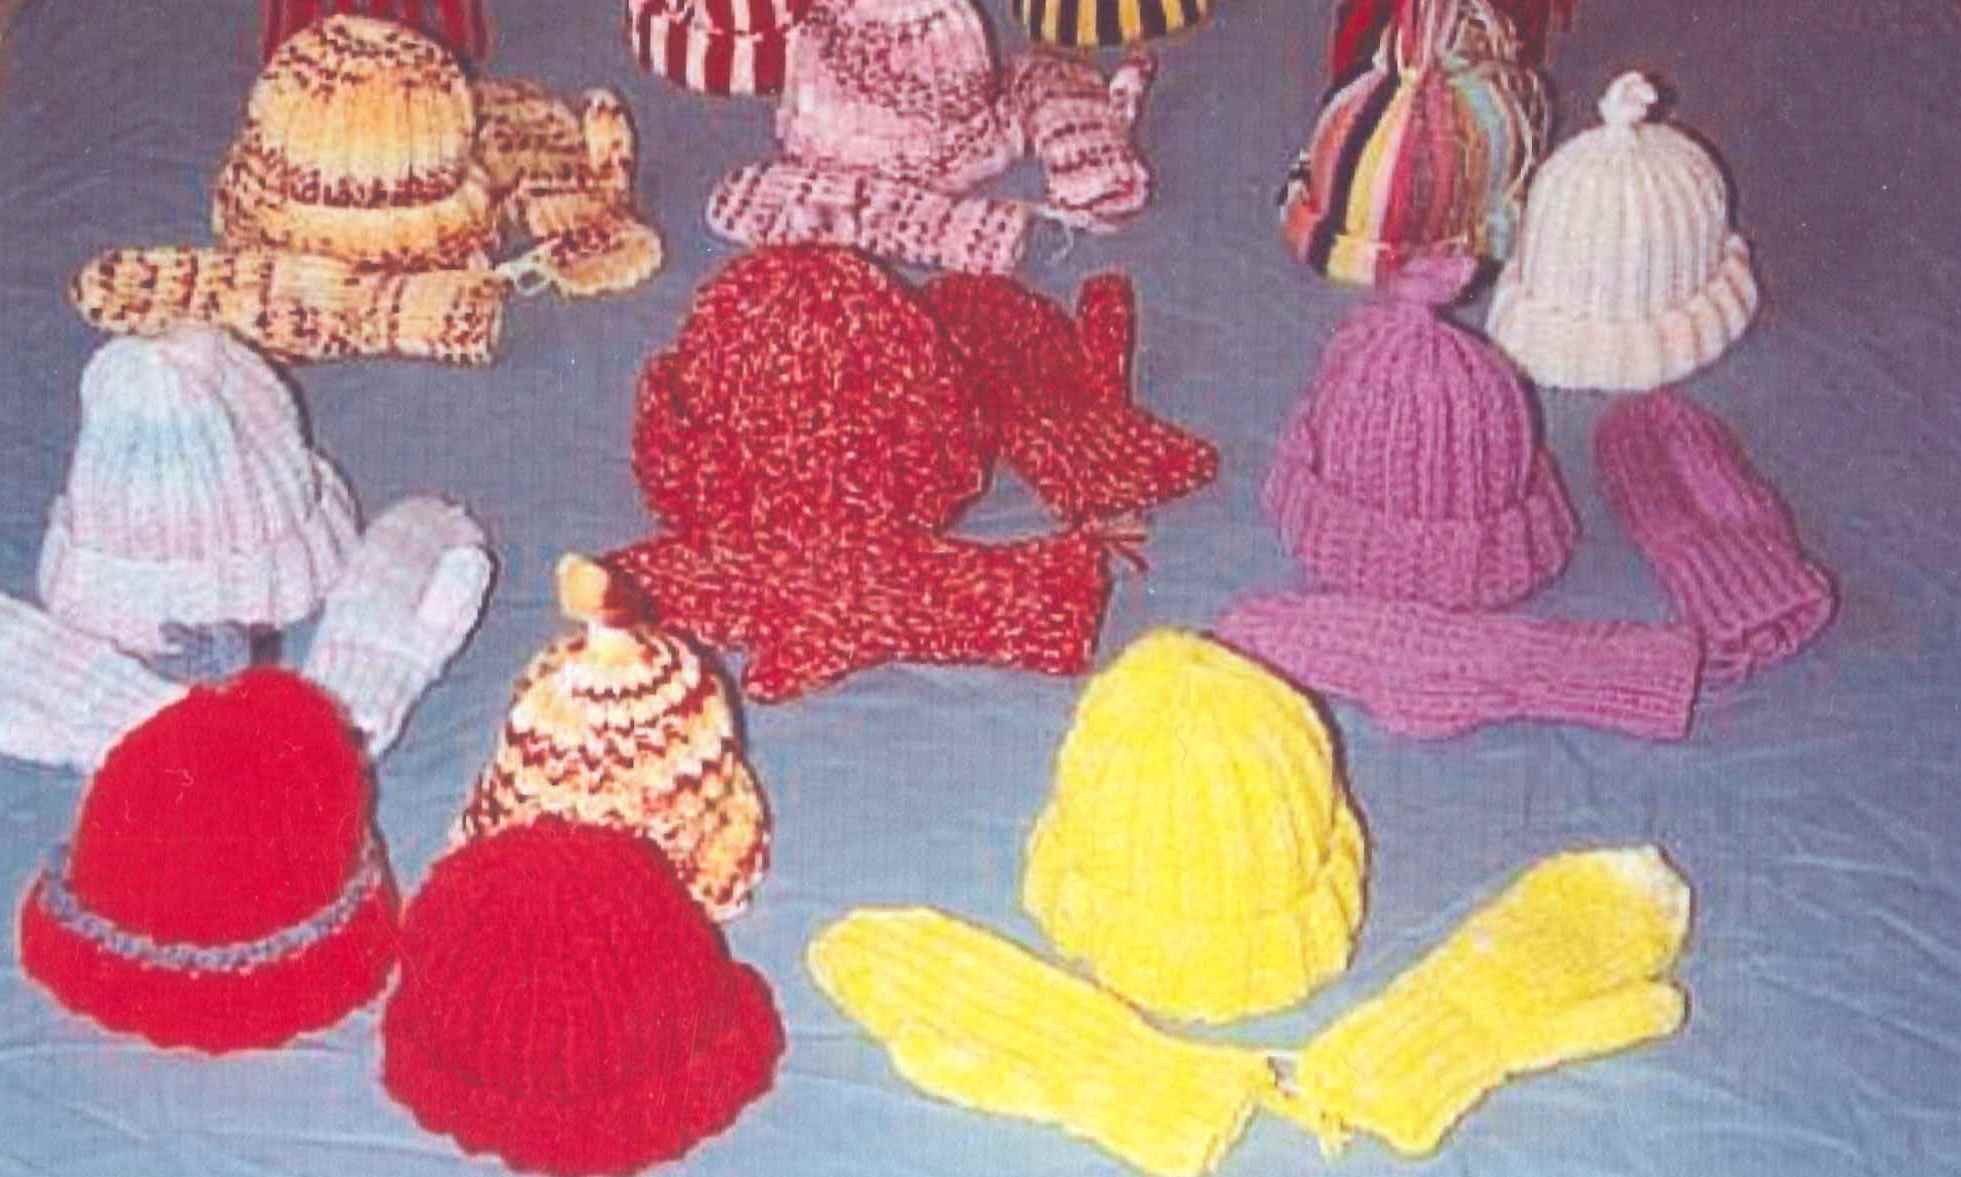 Knitted mittens and hats